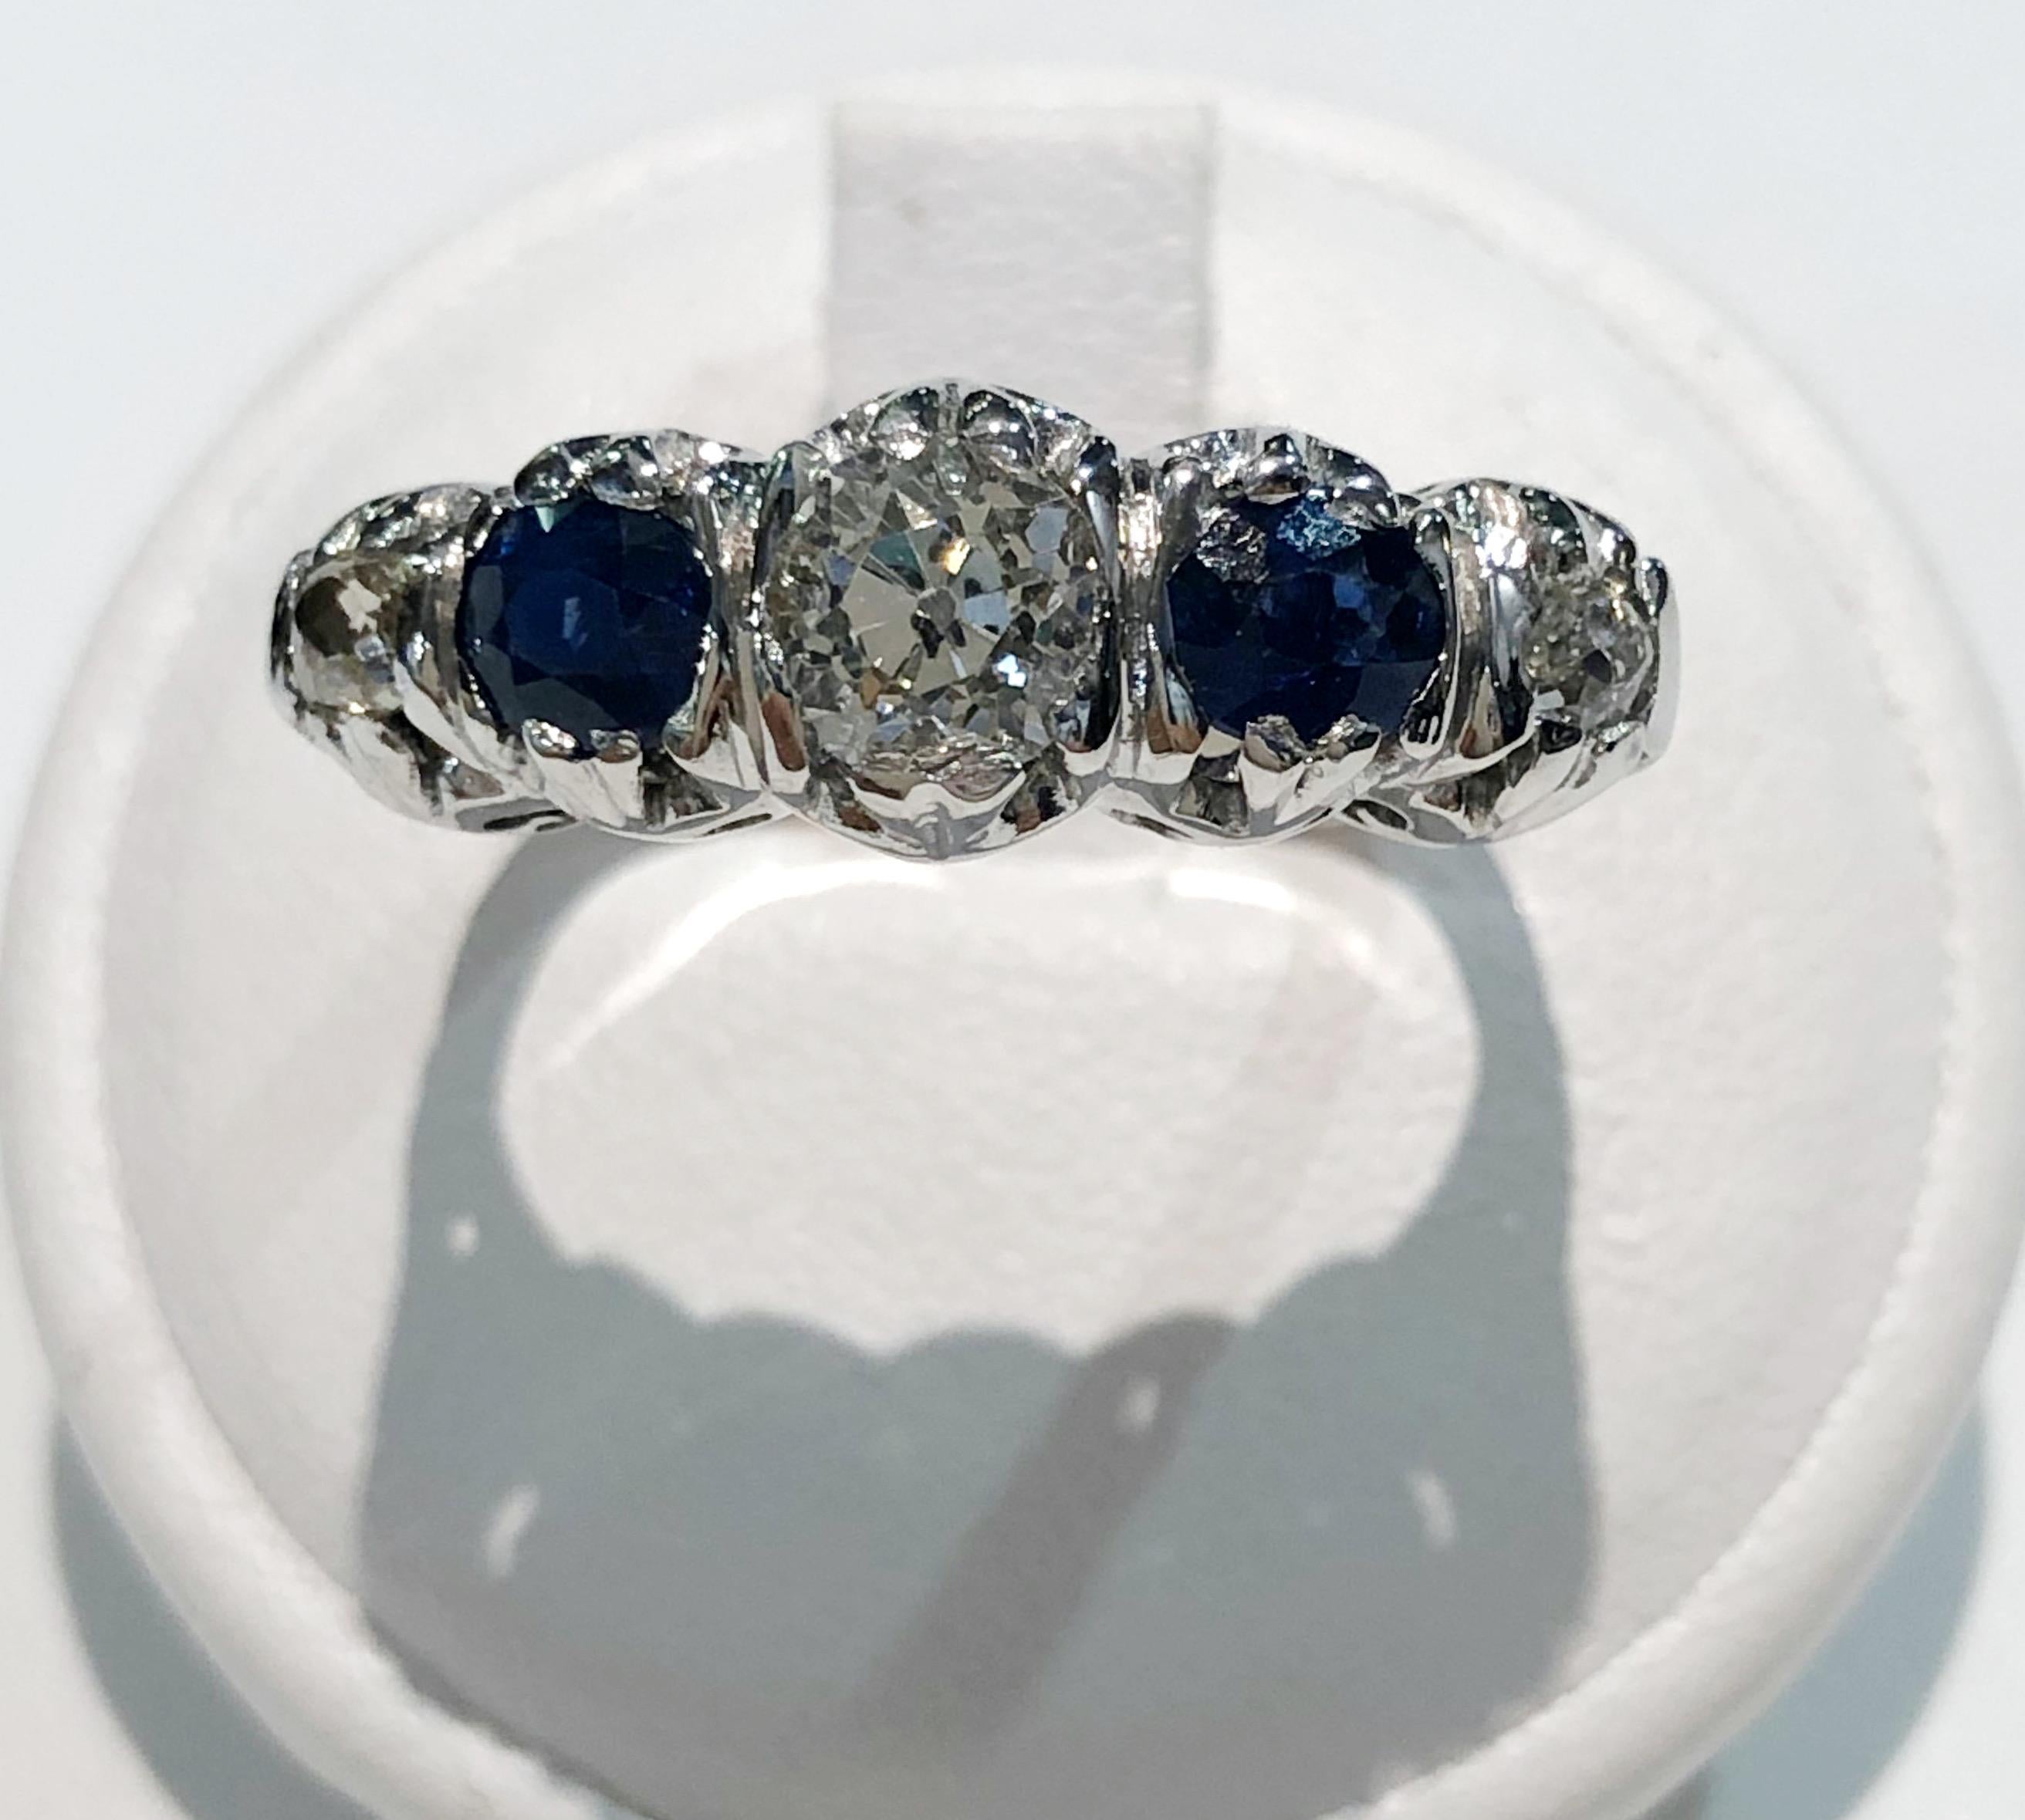 Vintage ring with 18 karat white gold band, two sapphires for a total of 0.8 karats and three brilliant diamonds for a total of 0.7 karats, Italy 1930s
Ring size US 7